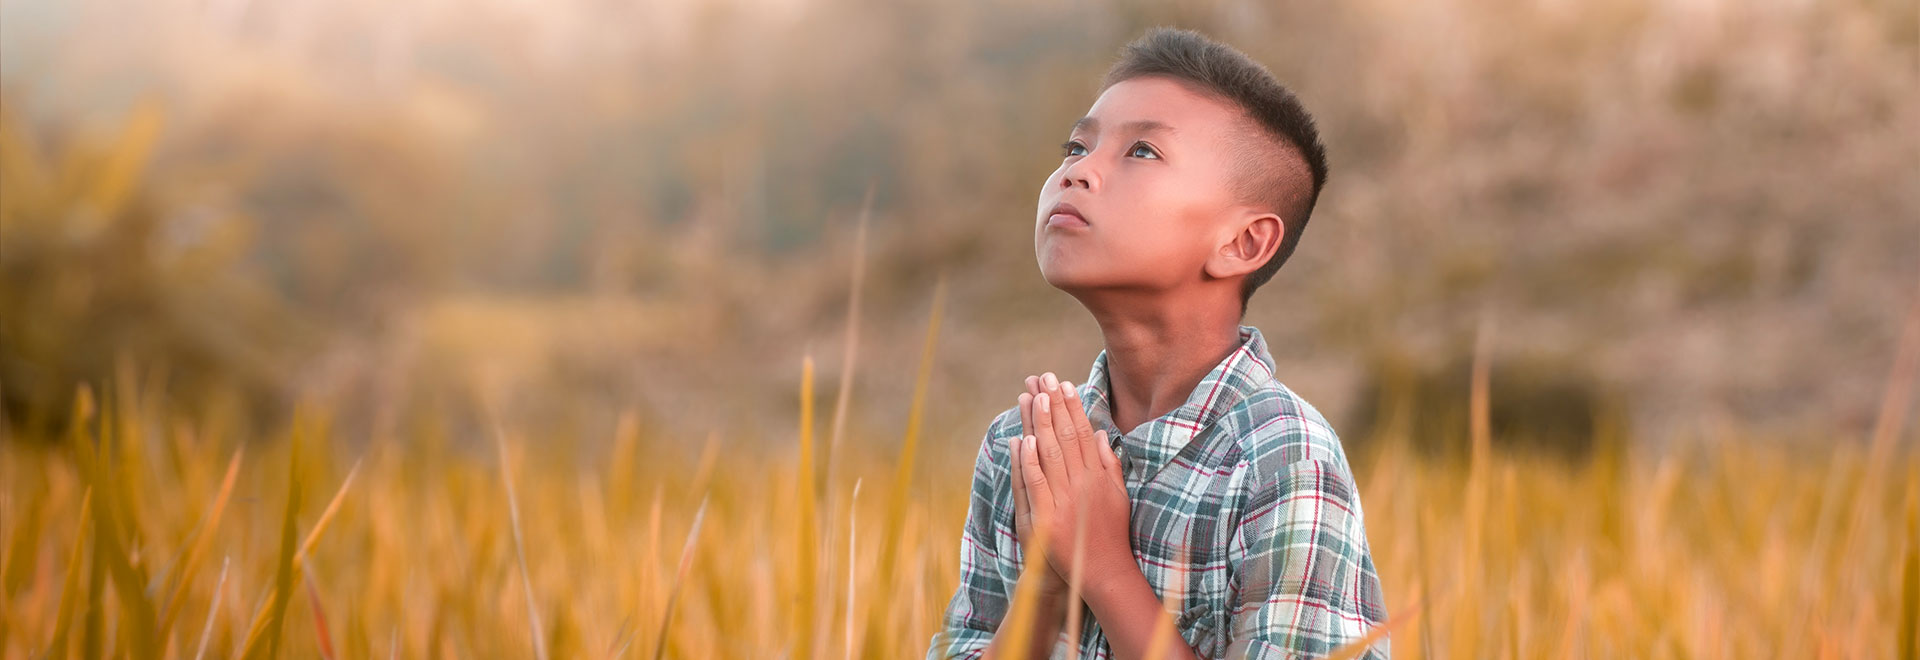 a young asian boy looking up at the sky and praying surrounded by tall yellow grass